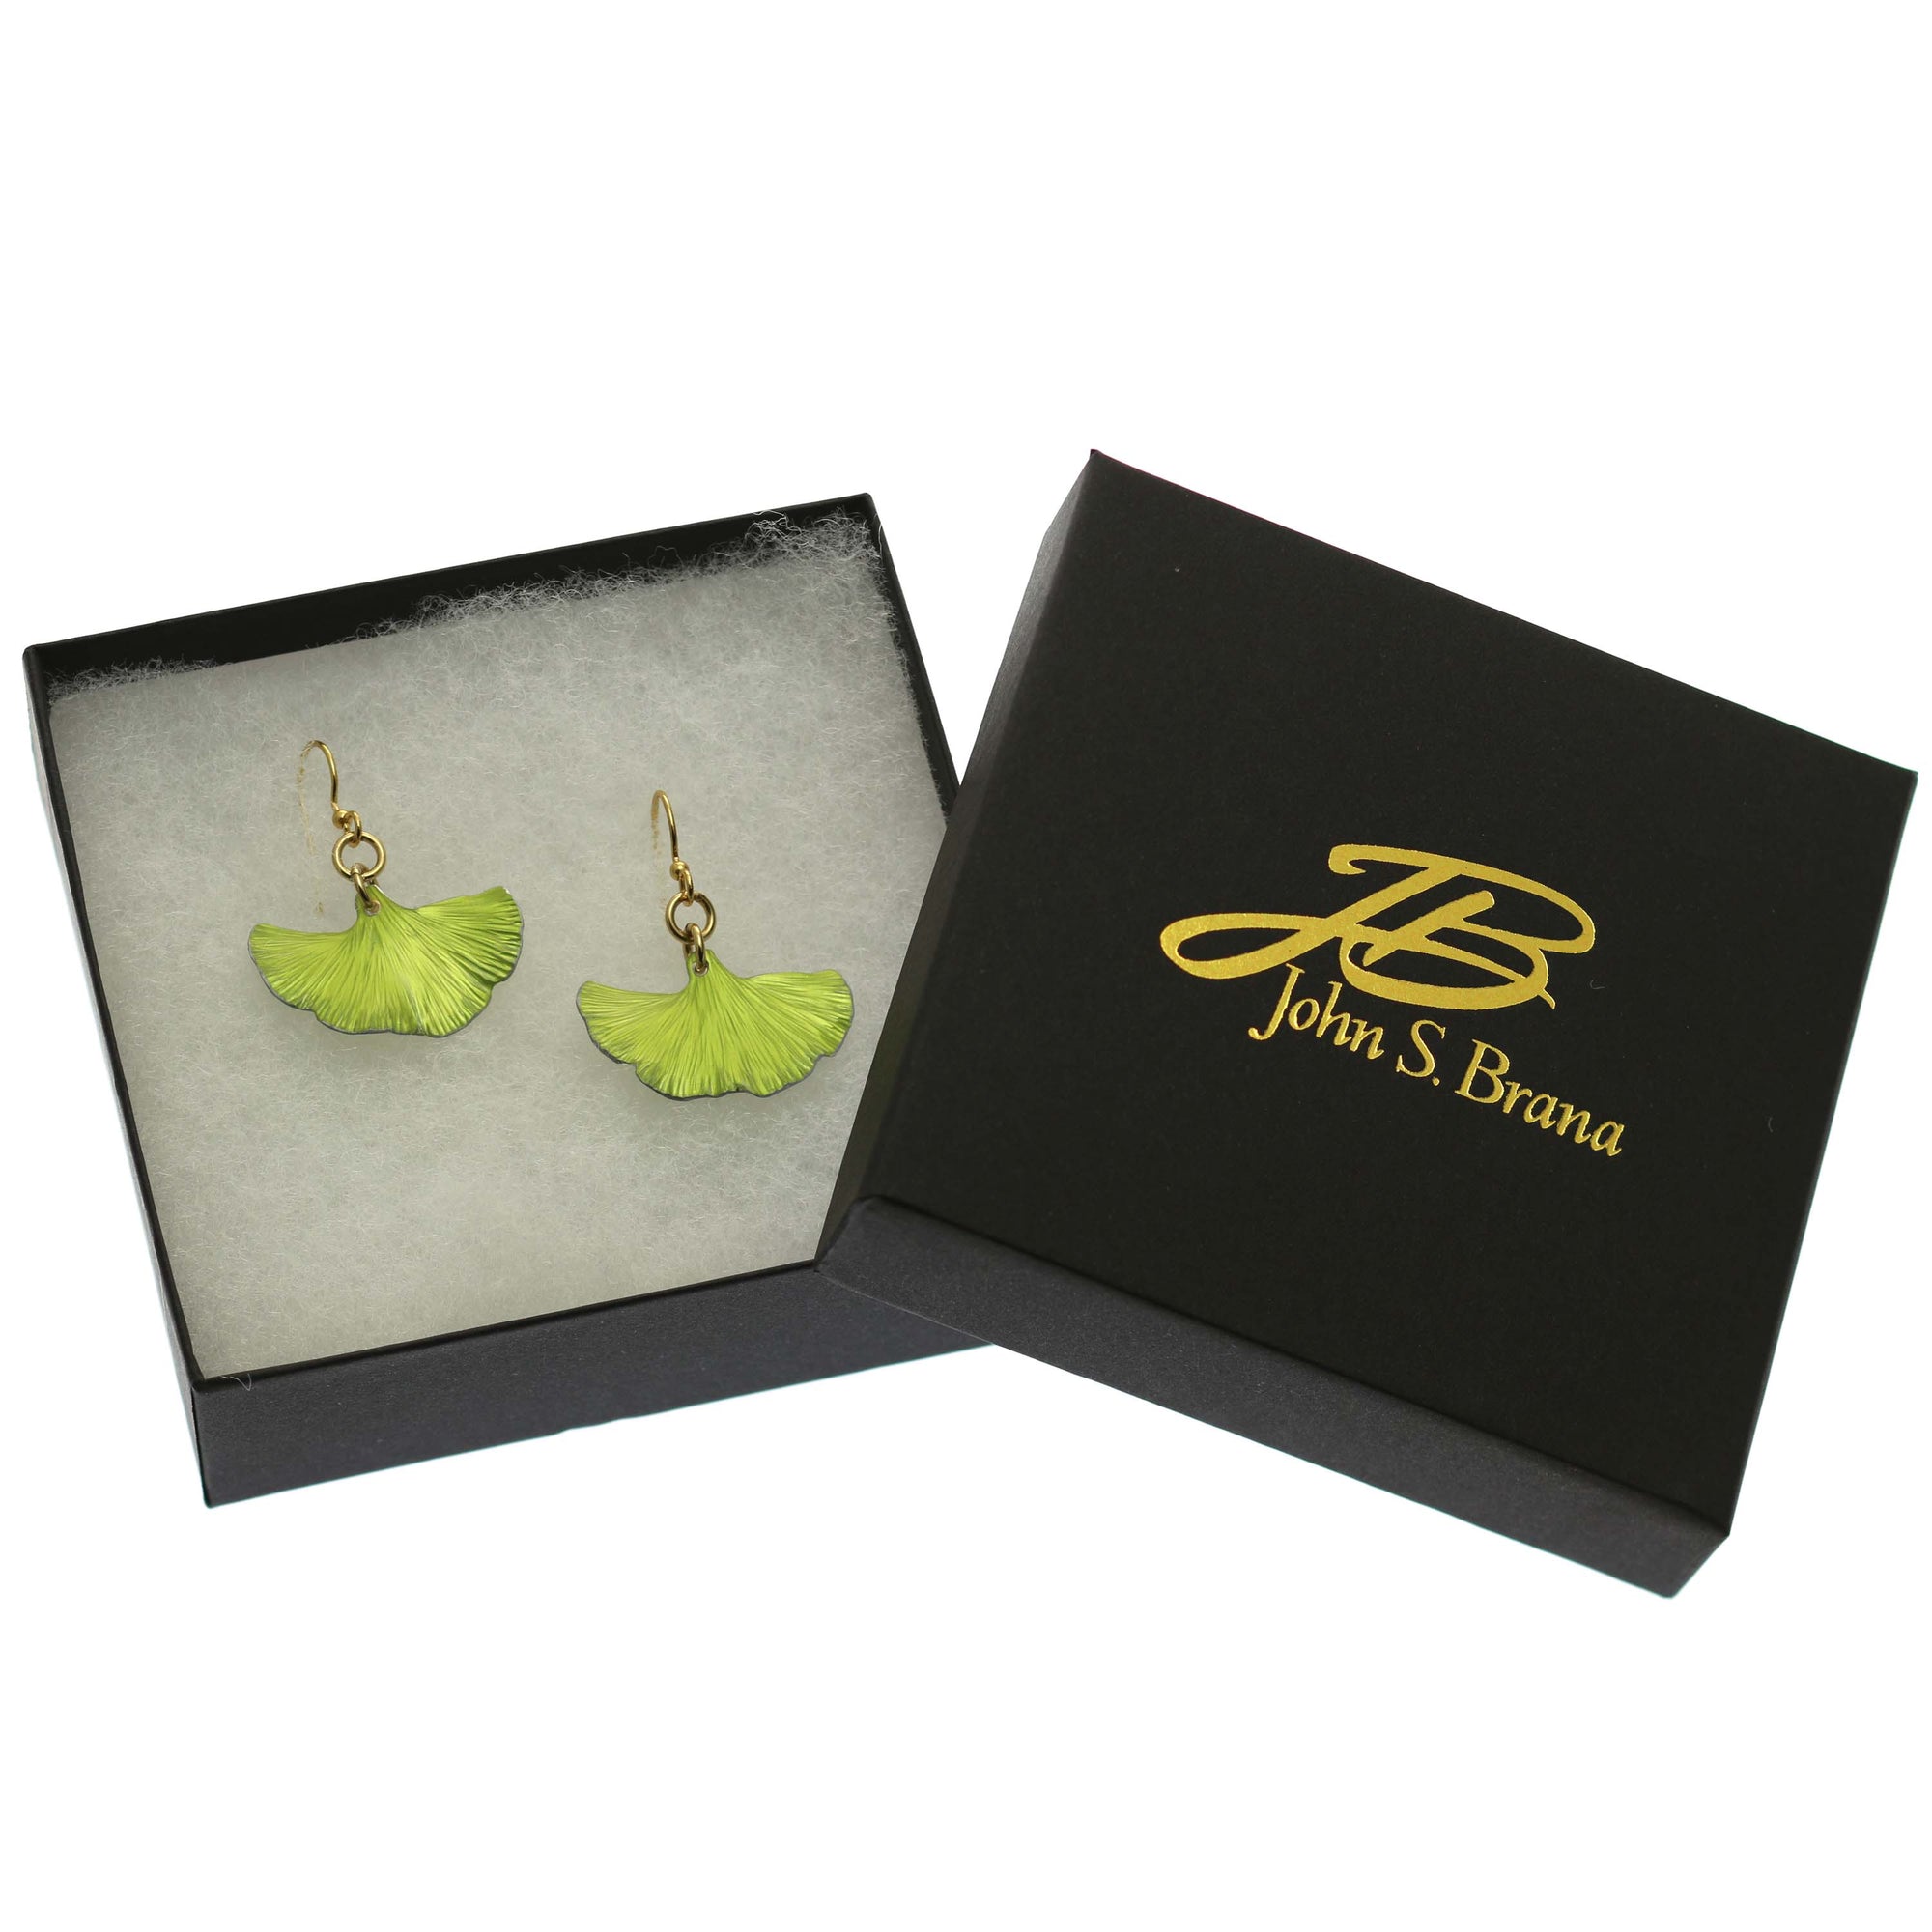 Small Ginkgo Leaf Anodized Aluminum Sour Candy Apple Earrings in a Black Gift Box with Gold Logo